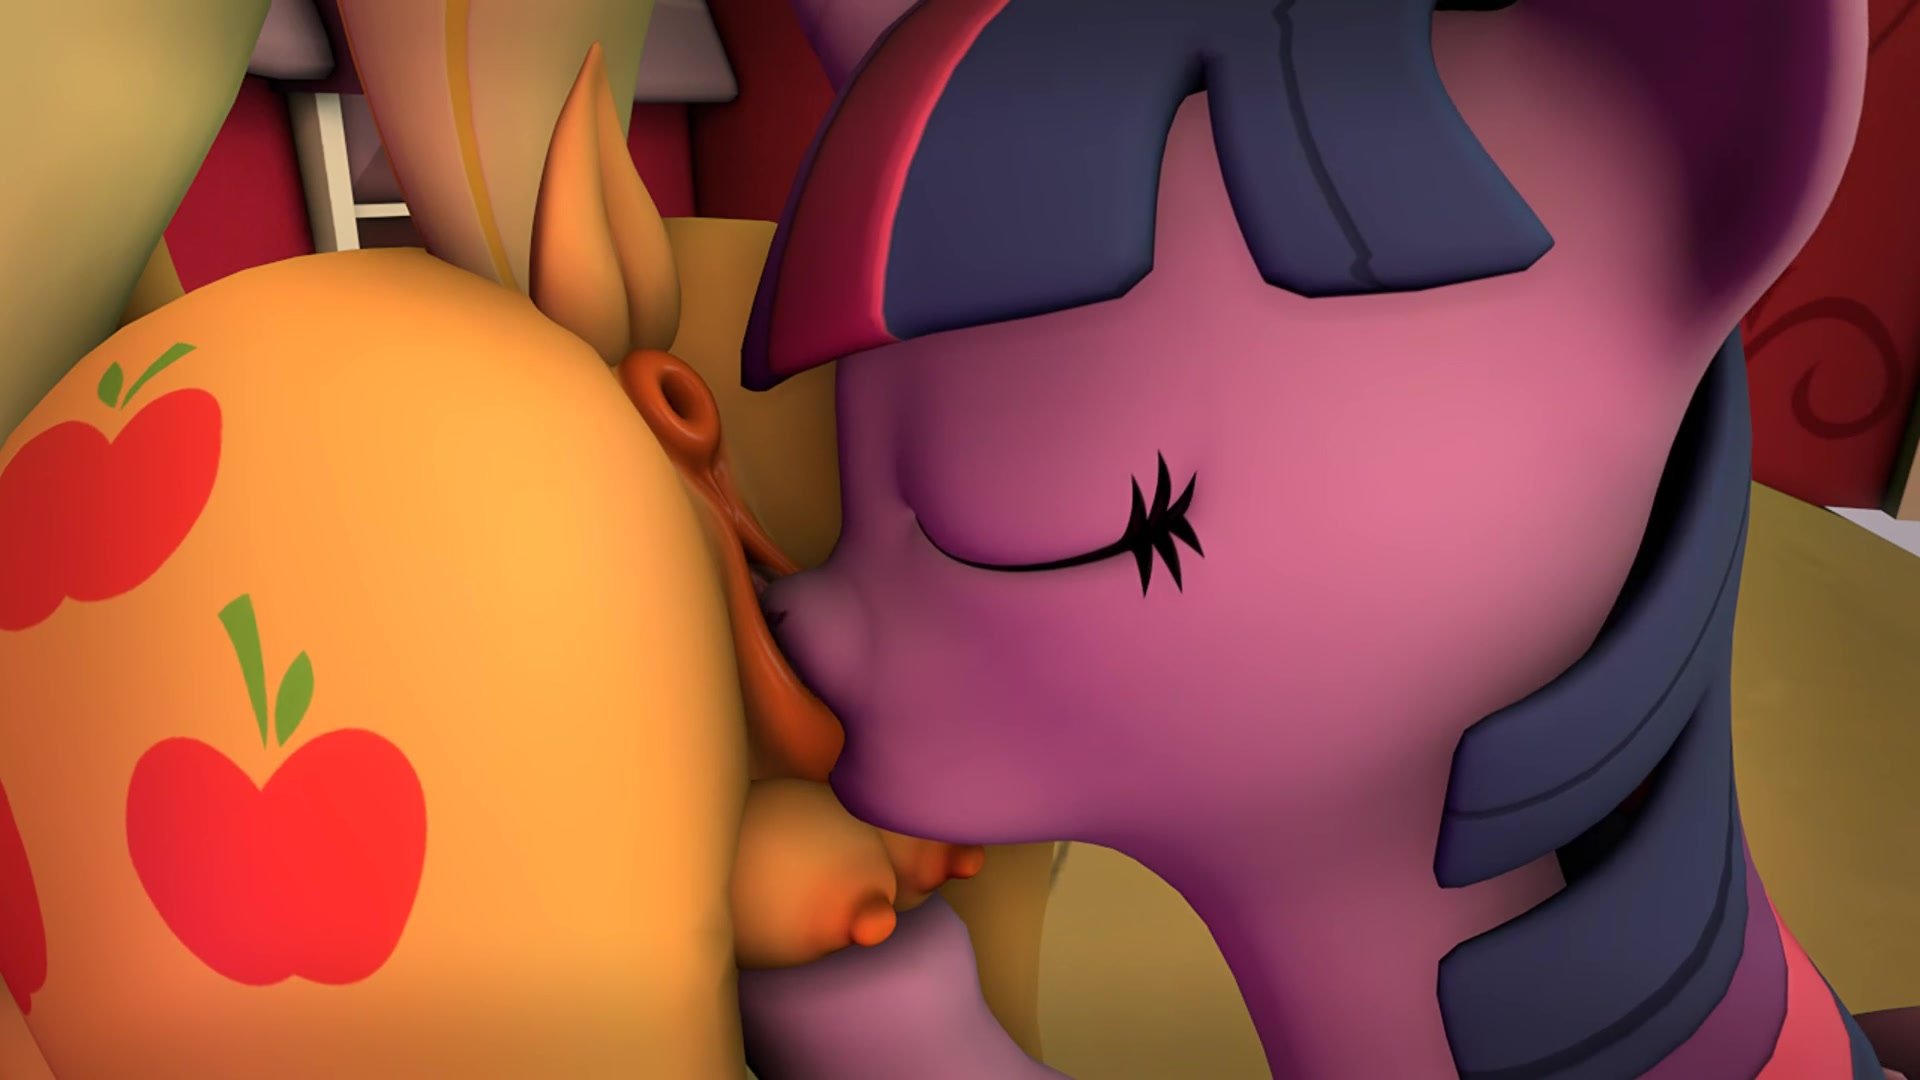 Twilight has a moment with applejack - ThisVid.com